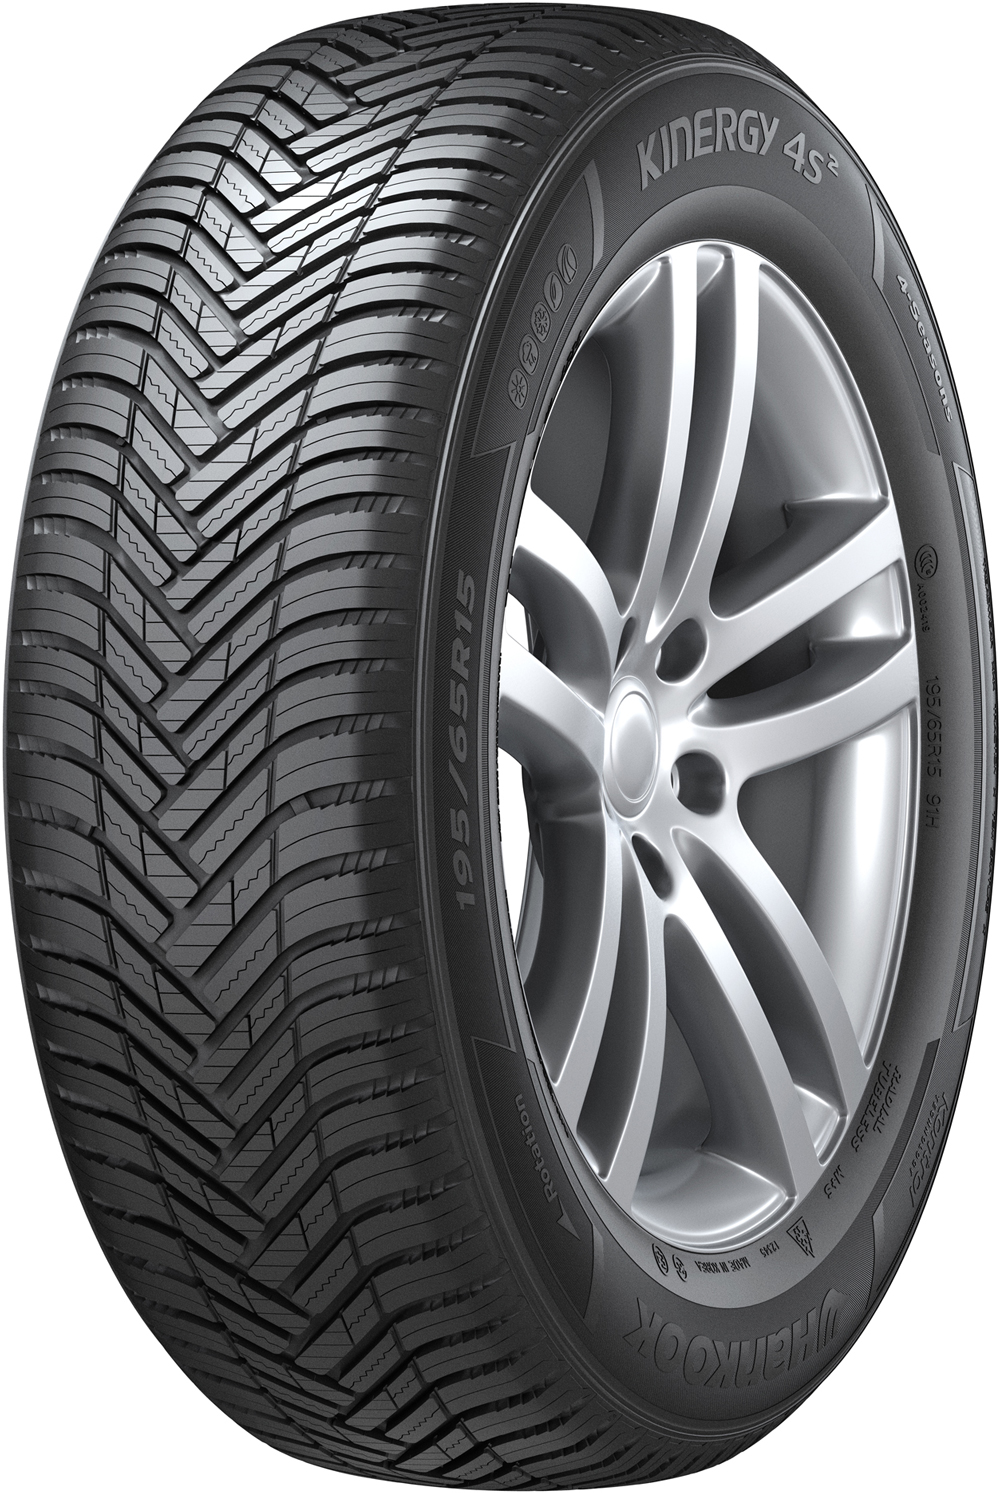 Anvelope auto HANKOOK H750B Kinergy 4S2 hrs XL RFT 225/50 R17 98W